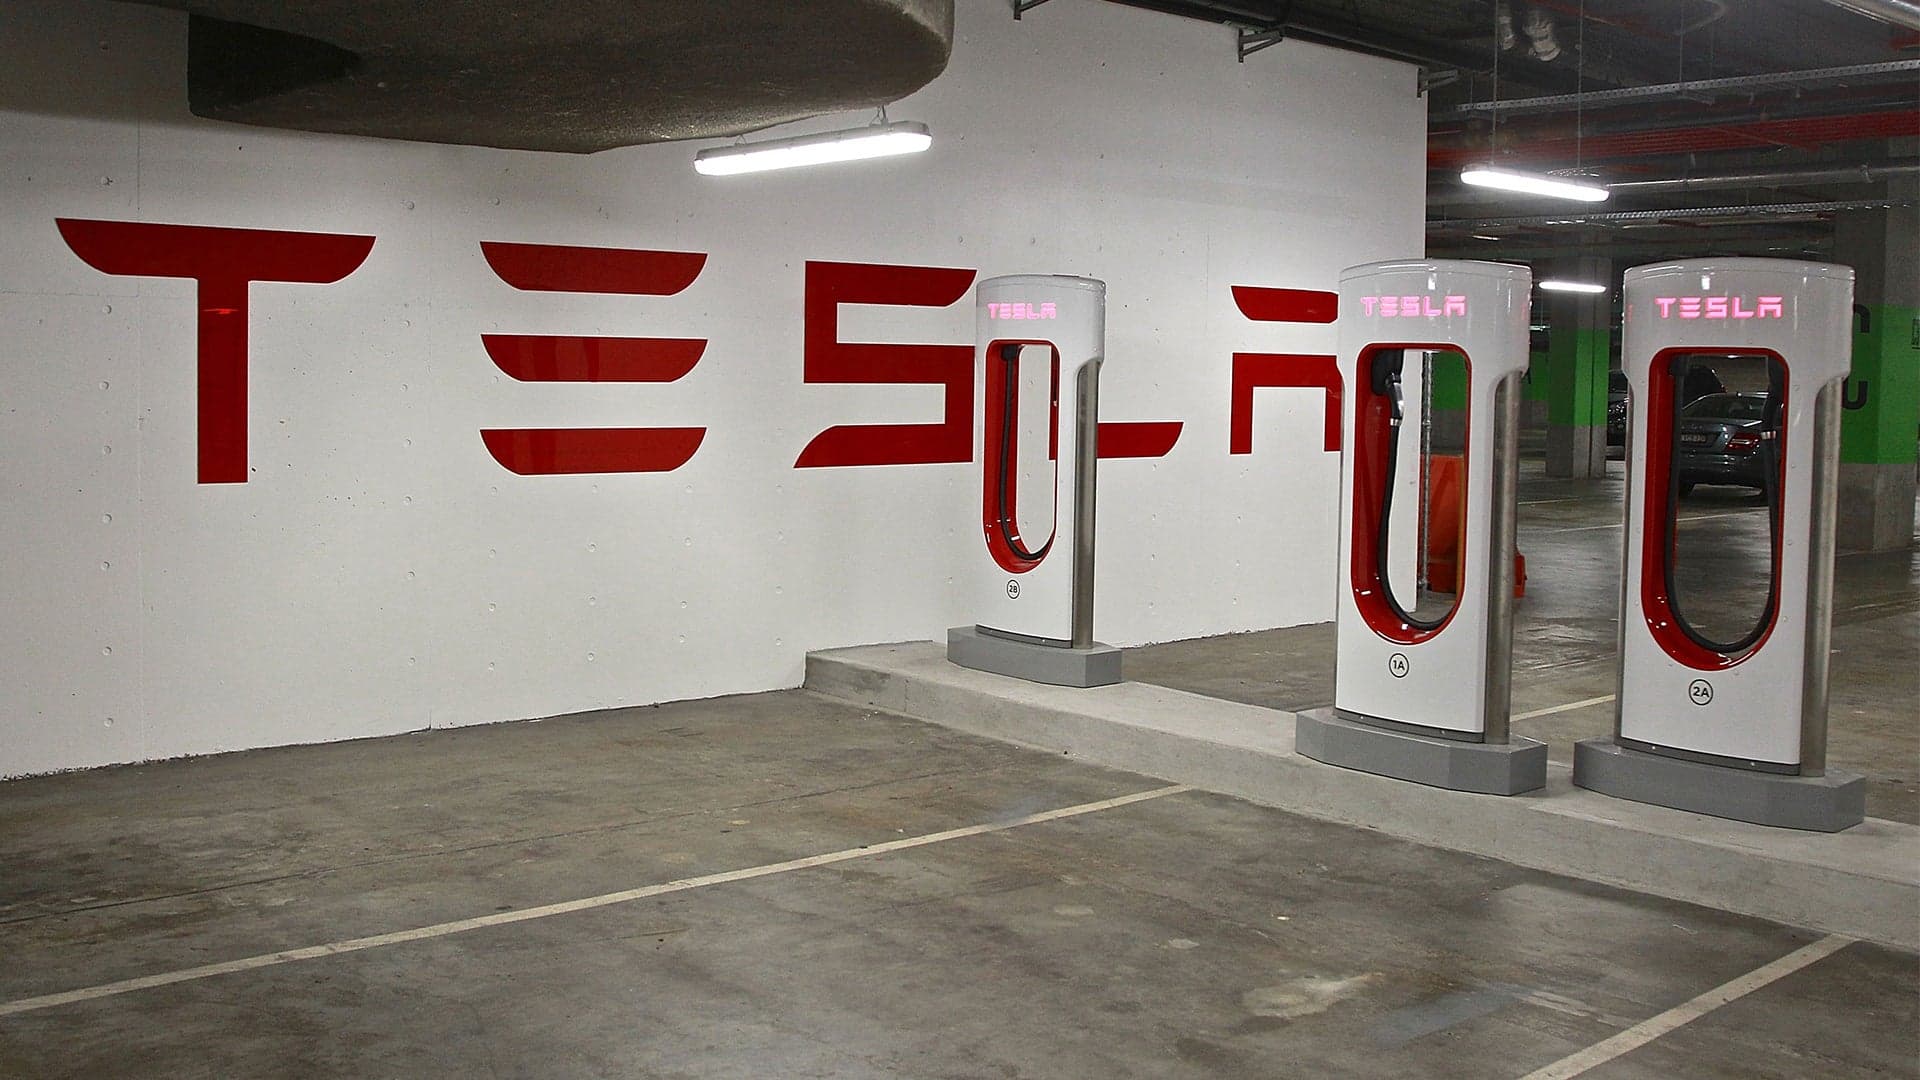 Tesla Faces Accusations of Sexual Harassment by Female Employees, Report Claims